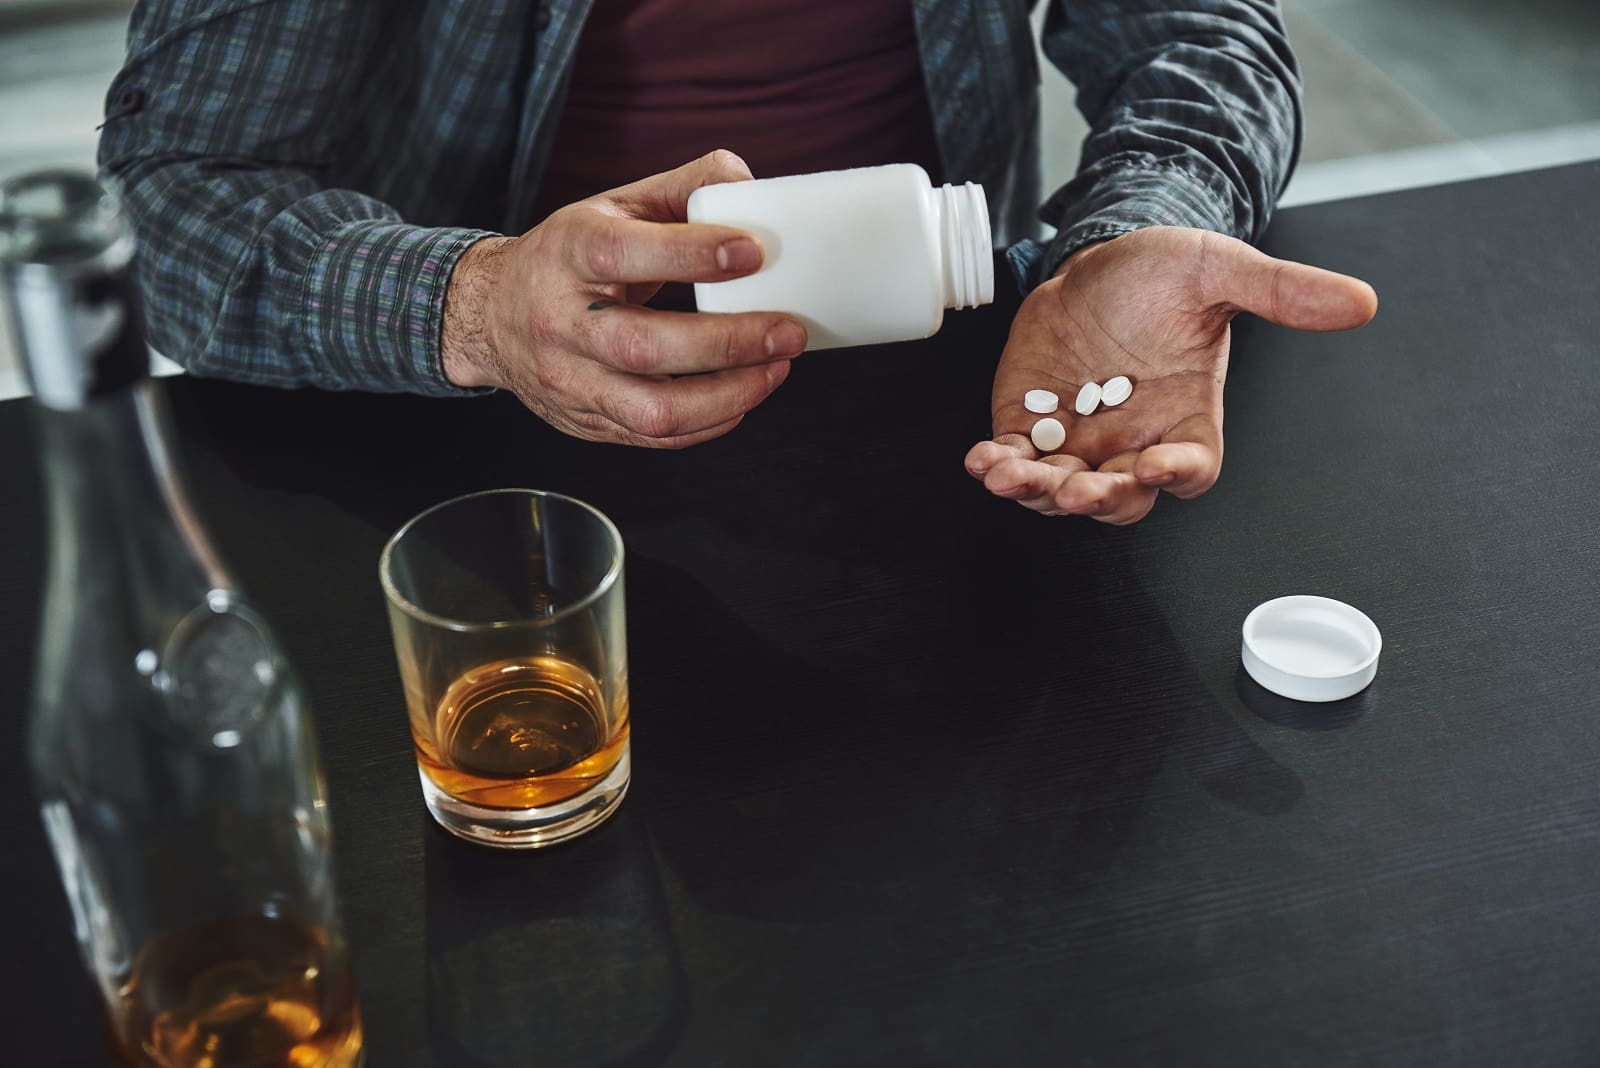 Combining alcohol and diet pills can lead to increased side effects from both drugs